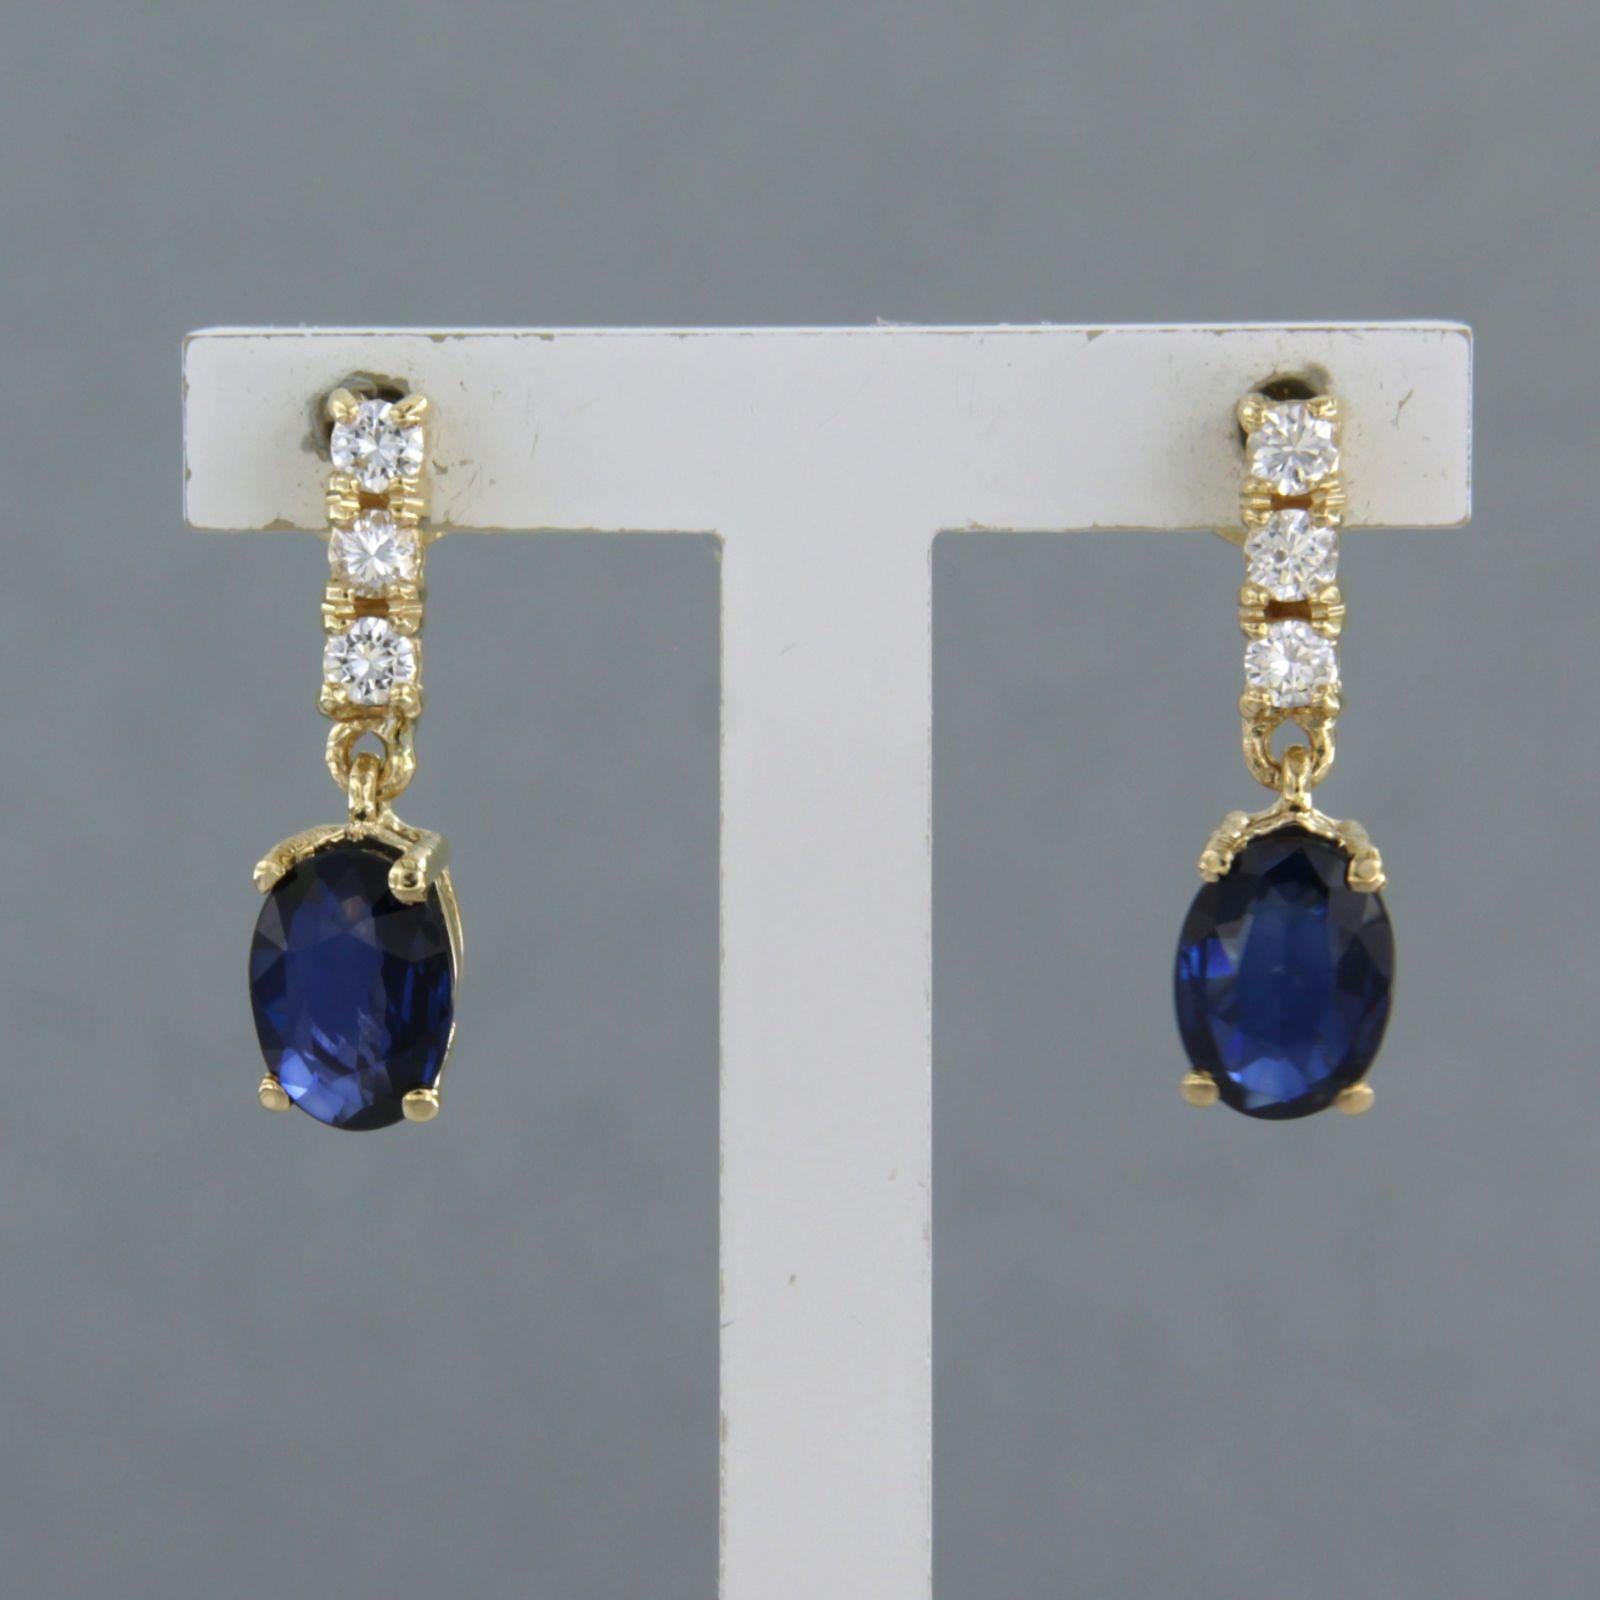 18k yellow gold earrings set with sapphire up to. 1.50ct and brilliant cut diamond up to. 0.24ct - F/G - VS/SI

detailed description:

The dimensions of the earrings are 1.7 cm long by 4.9 mm wide

weight: 2.6 grams

occupied with :

- 2 x 7.0 mm x